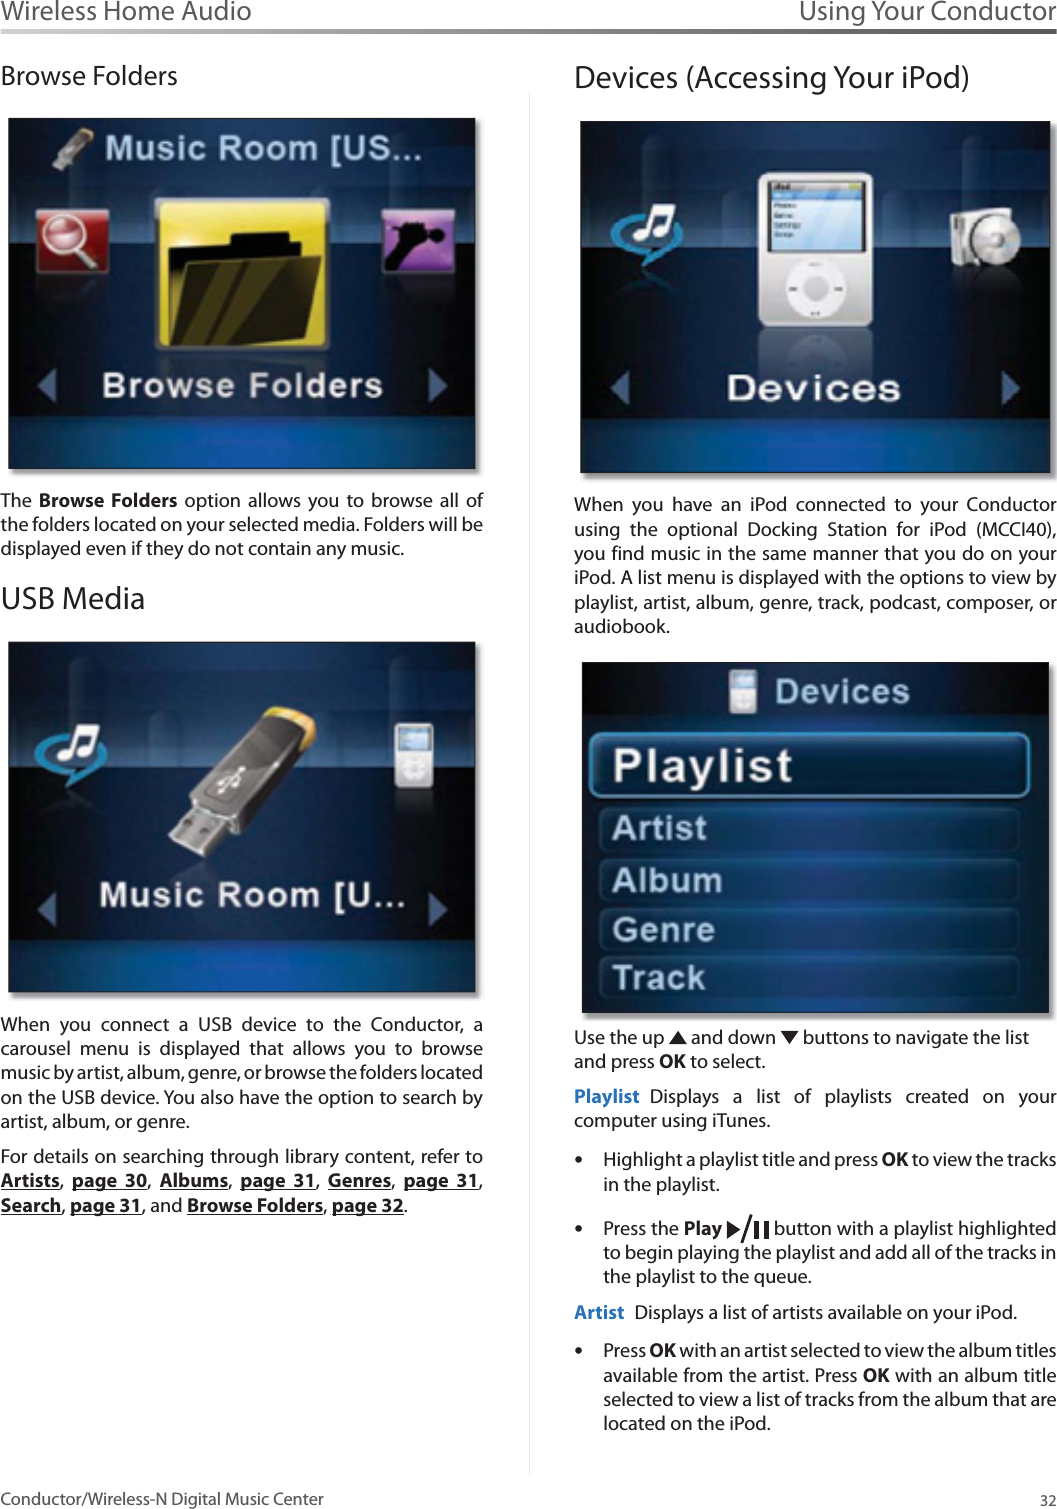 Using Your Conductor32Wireless Home AudioConductor/Wireless-N Digital Music CenterBrowse FoldersThe  Browse Folders option allows you to browse all of the folders located on your selected media. Folders will be displayed even if they do not contain any music.  USB MediaWhen you connect a USB device to the Conductor, a carousel menu is displayed that allows you to browse music by artist, album, genre, or browse the folders located on the USB device. You also have the option to search by artist, album, or genre.For details on searching through library content, refer to Artists,page 30,Albums,page 31,Genres,page 31,Search,page 31, and Browse Folders,page 32.Devices (Accessing Your iPod)When you have an iPod connected to your Conductor using the optional Docking Station for iPod (MCCI40), you find music in the same manner that you do on your iPod. A list menu is displayed with the options to view by playlist, artist, album, genre, track, podcast, composer, or audiobook.Use the up   and down   buttons to navigate the list and press OK to select.Playlist Displays a list of playlists created on your computer using iTunes. Highlight a playlist title and press sOK to view the tracks in the playlist. Press the sPlay  button with a playlist highlighted to begin playing the playlist and add all of the tracks in the playlist to the queue. Artist Displays a list of artists available on your iPod. Press sOK with an artist selected to view the album titles available from the artist. Press OK with an album title selected to view a list of tracks from the album that are located on the iPod. 